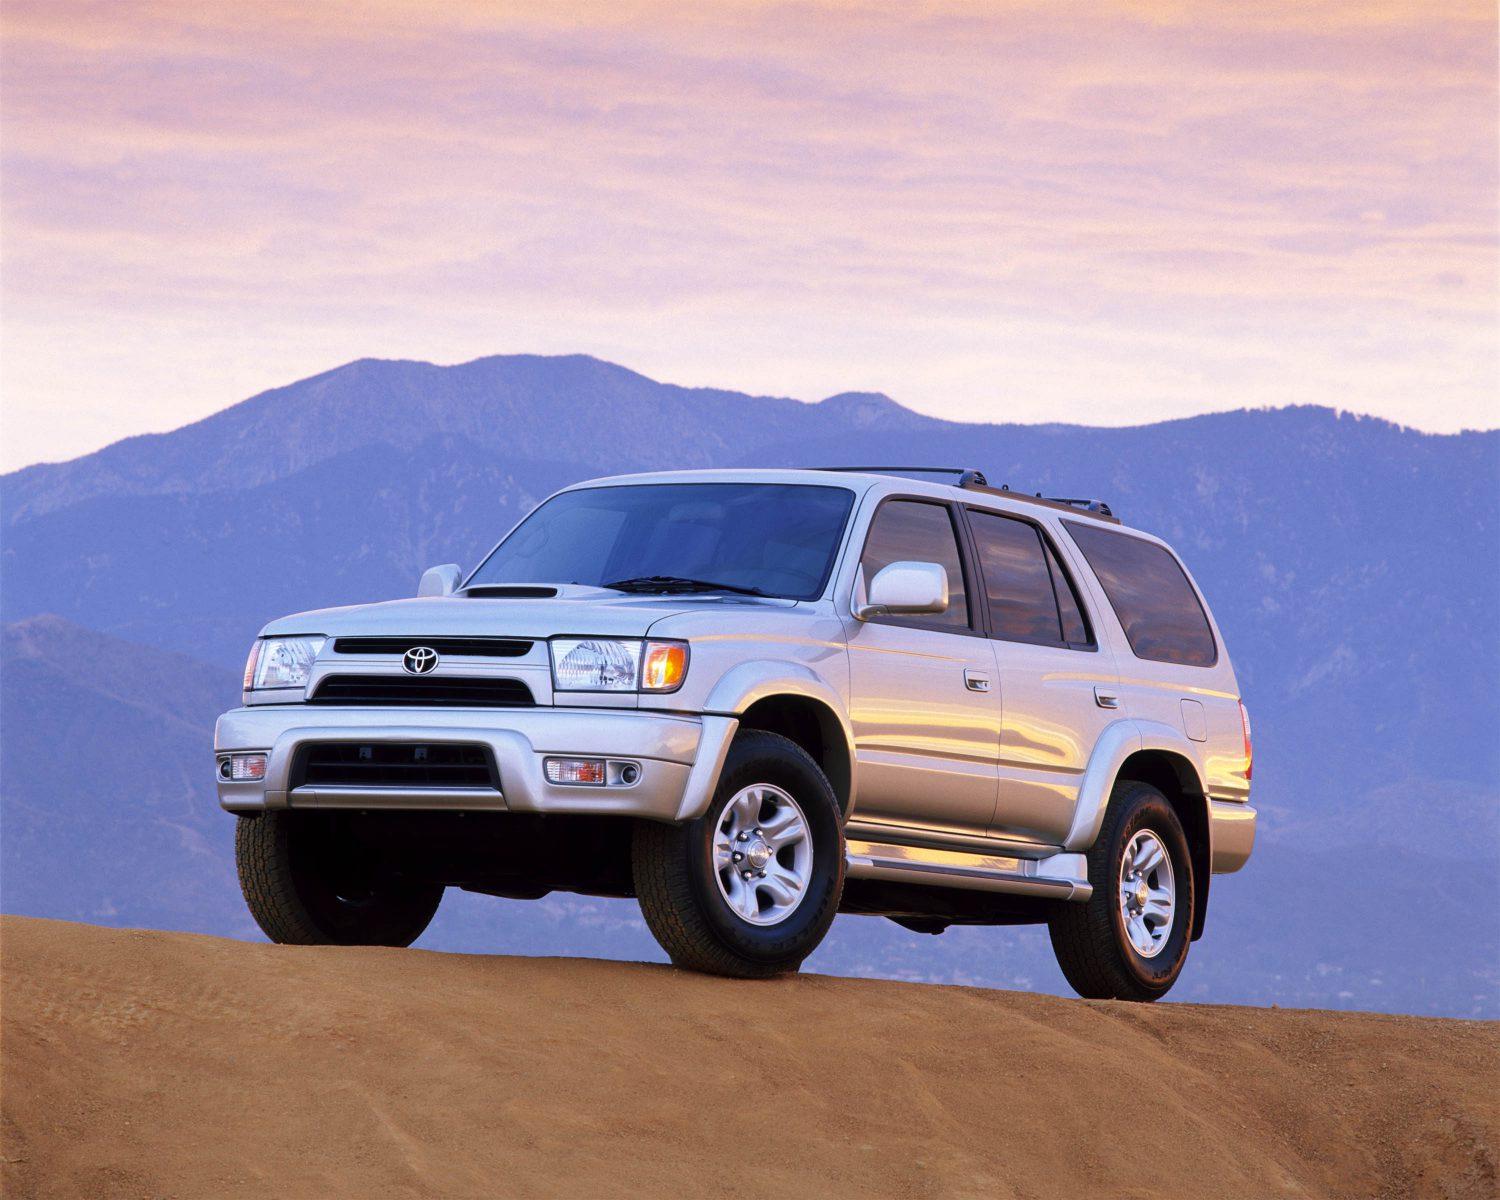 Image of 2001 Toyota 4Runner from Toyota's pressroom. 